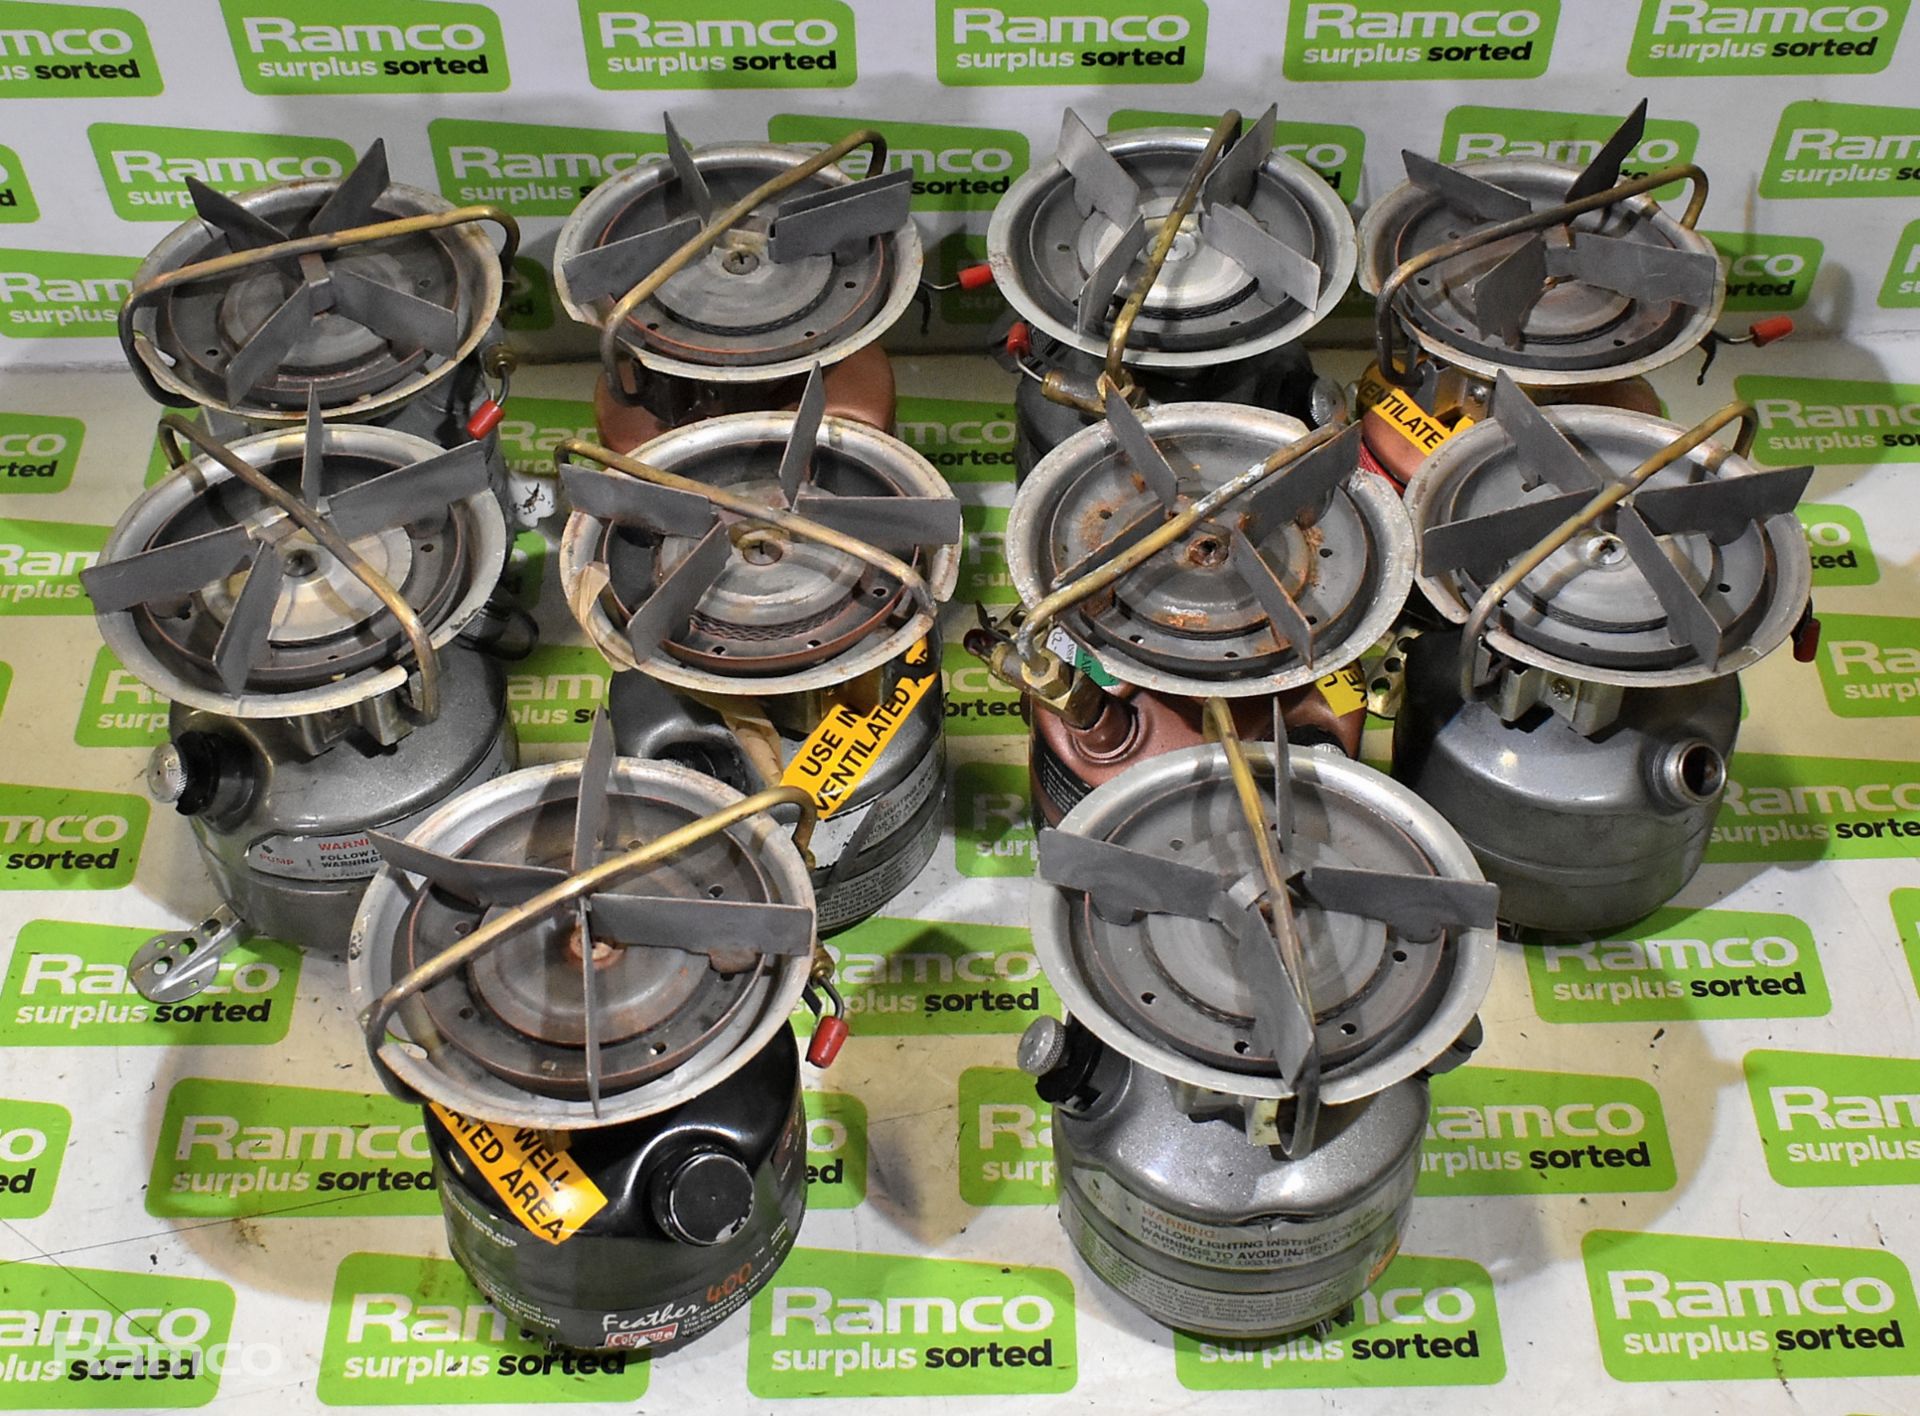 10x Coleman mini dual fuel stoves - see pictures for models & types - Image 4 of 4